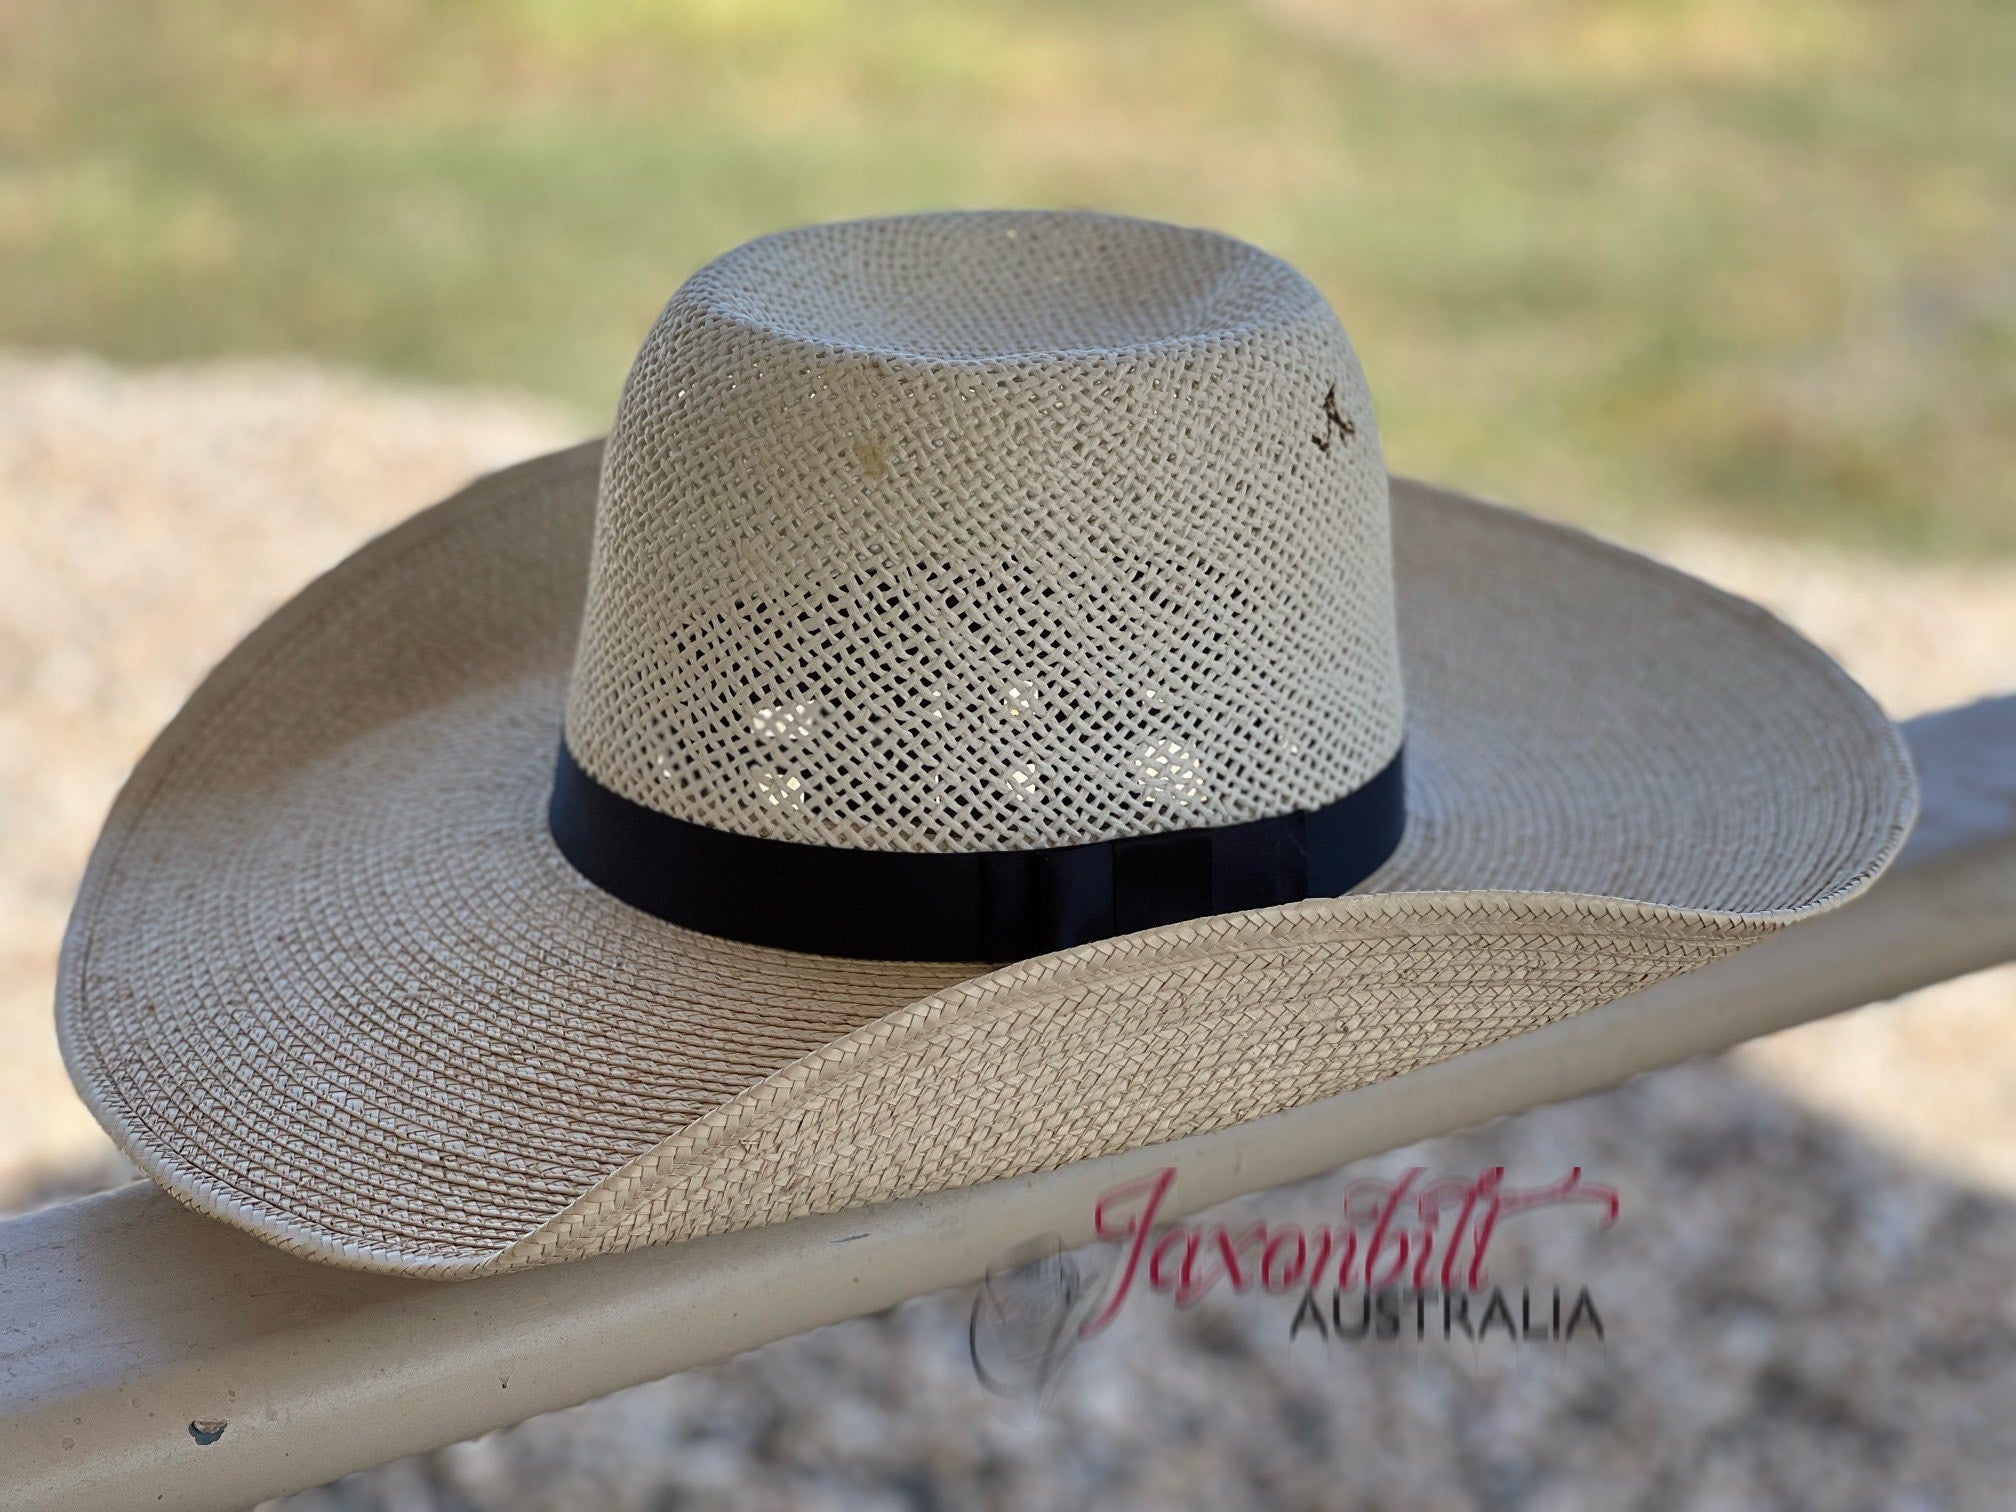 Jaxonbilt_Hats_are_Australian_made_palm_leaf_hats_and_crossbred_hats_for_cowgirls_and_cowboys_with_wide_brims_for_sun_protection_5”_brim_trim_on_edge_wide_crown_band_cool_hand_luke_shape_crossbred_light_palm